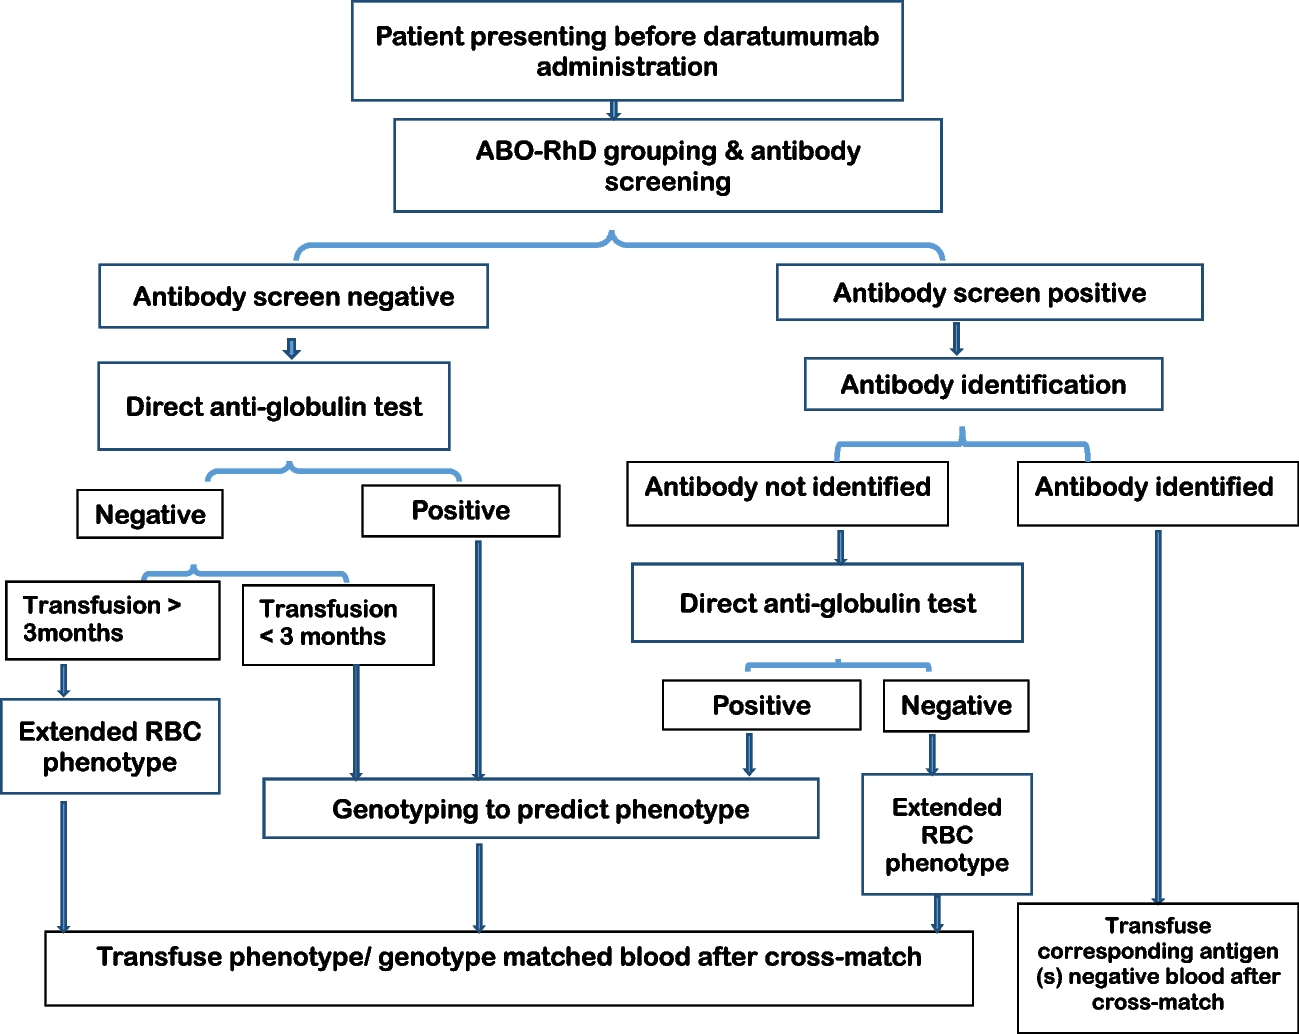 A Brief Report on Pre-Transfusion Testing in Patients Receiving the Anti-CD38 Monoclonal Antibody for Hematological Disorders in India